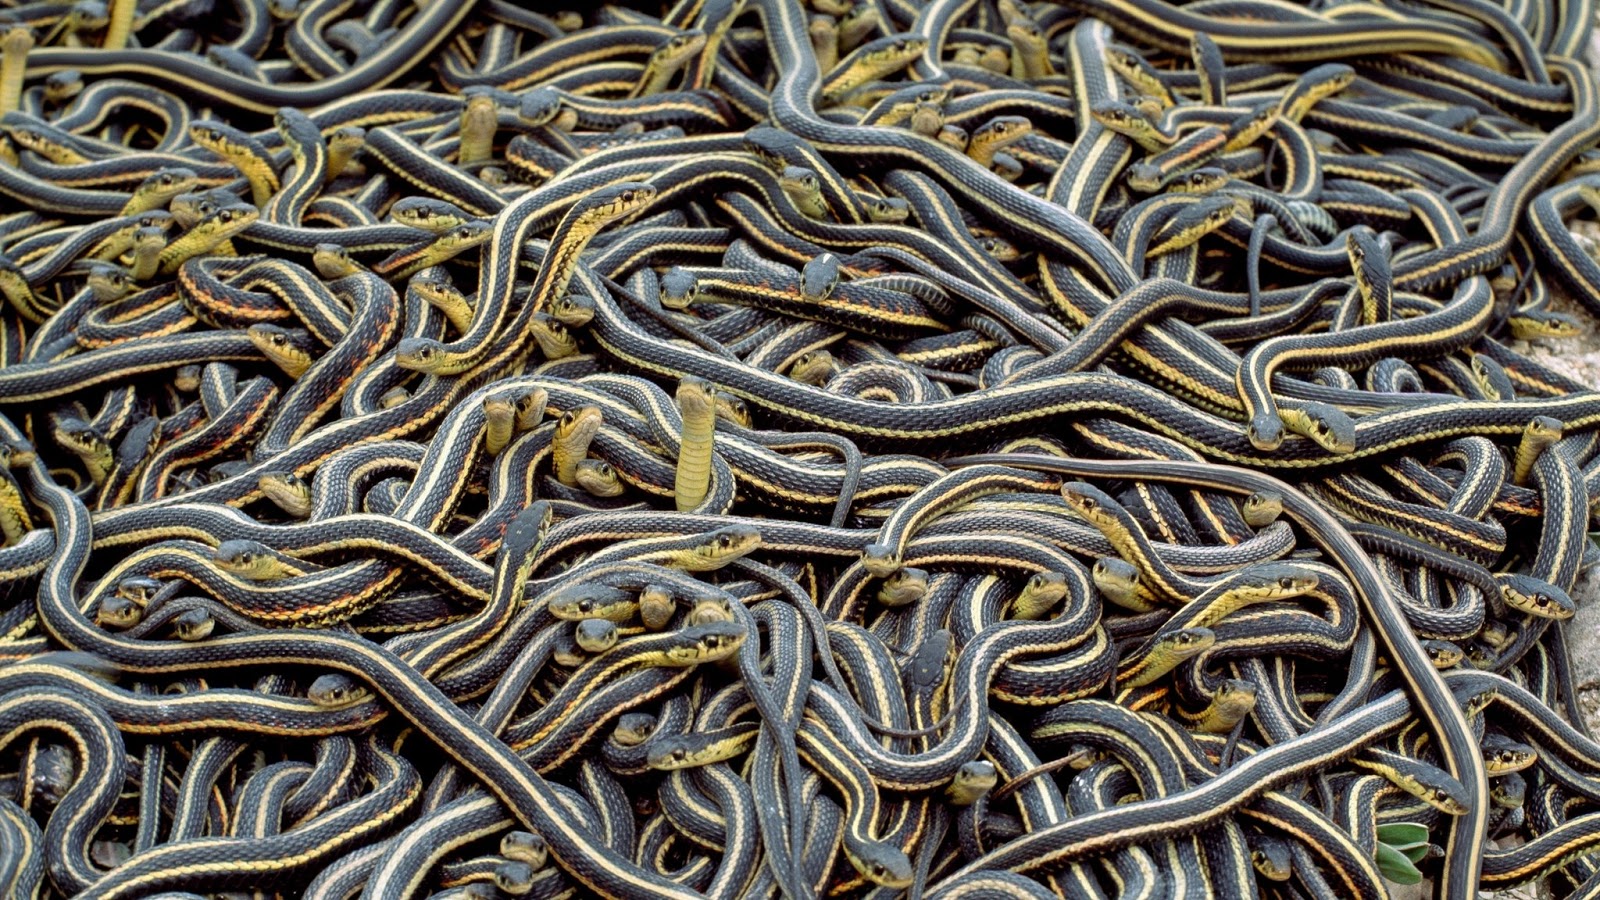 Dorchester Times: Increase In Garter Snakes Reported In Dorchester